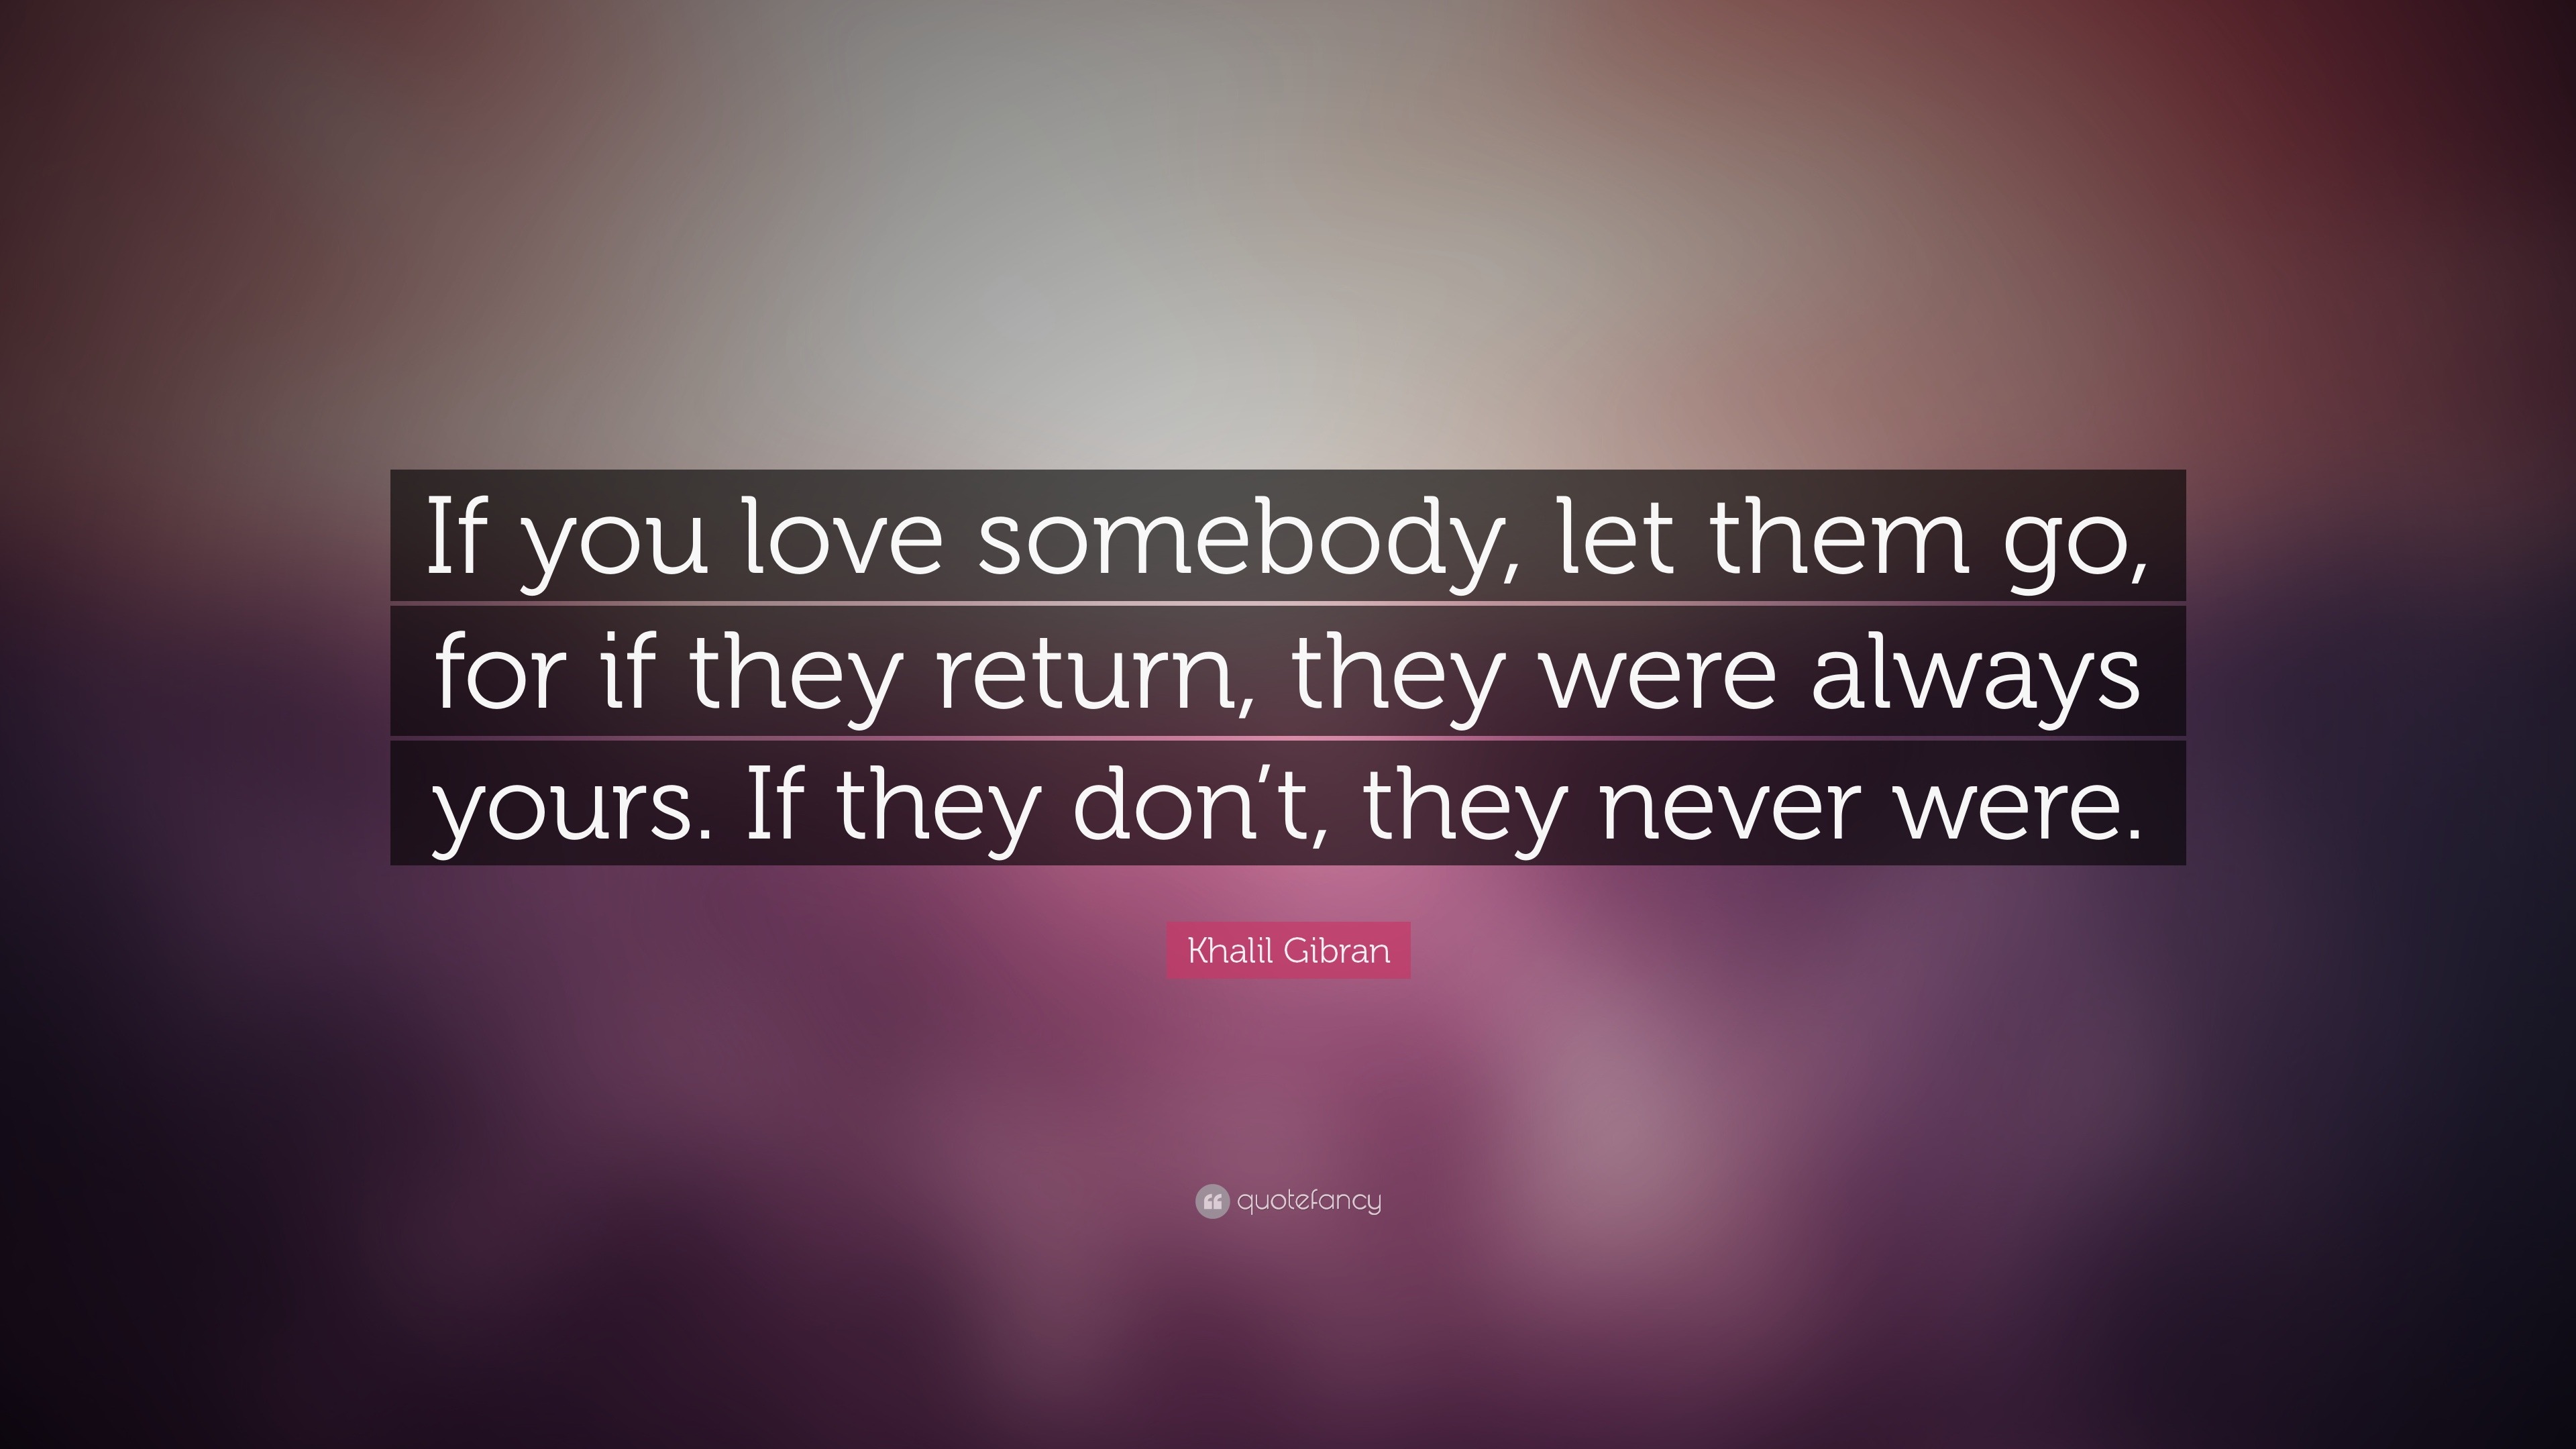 if you love someone you let them go